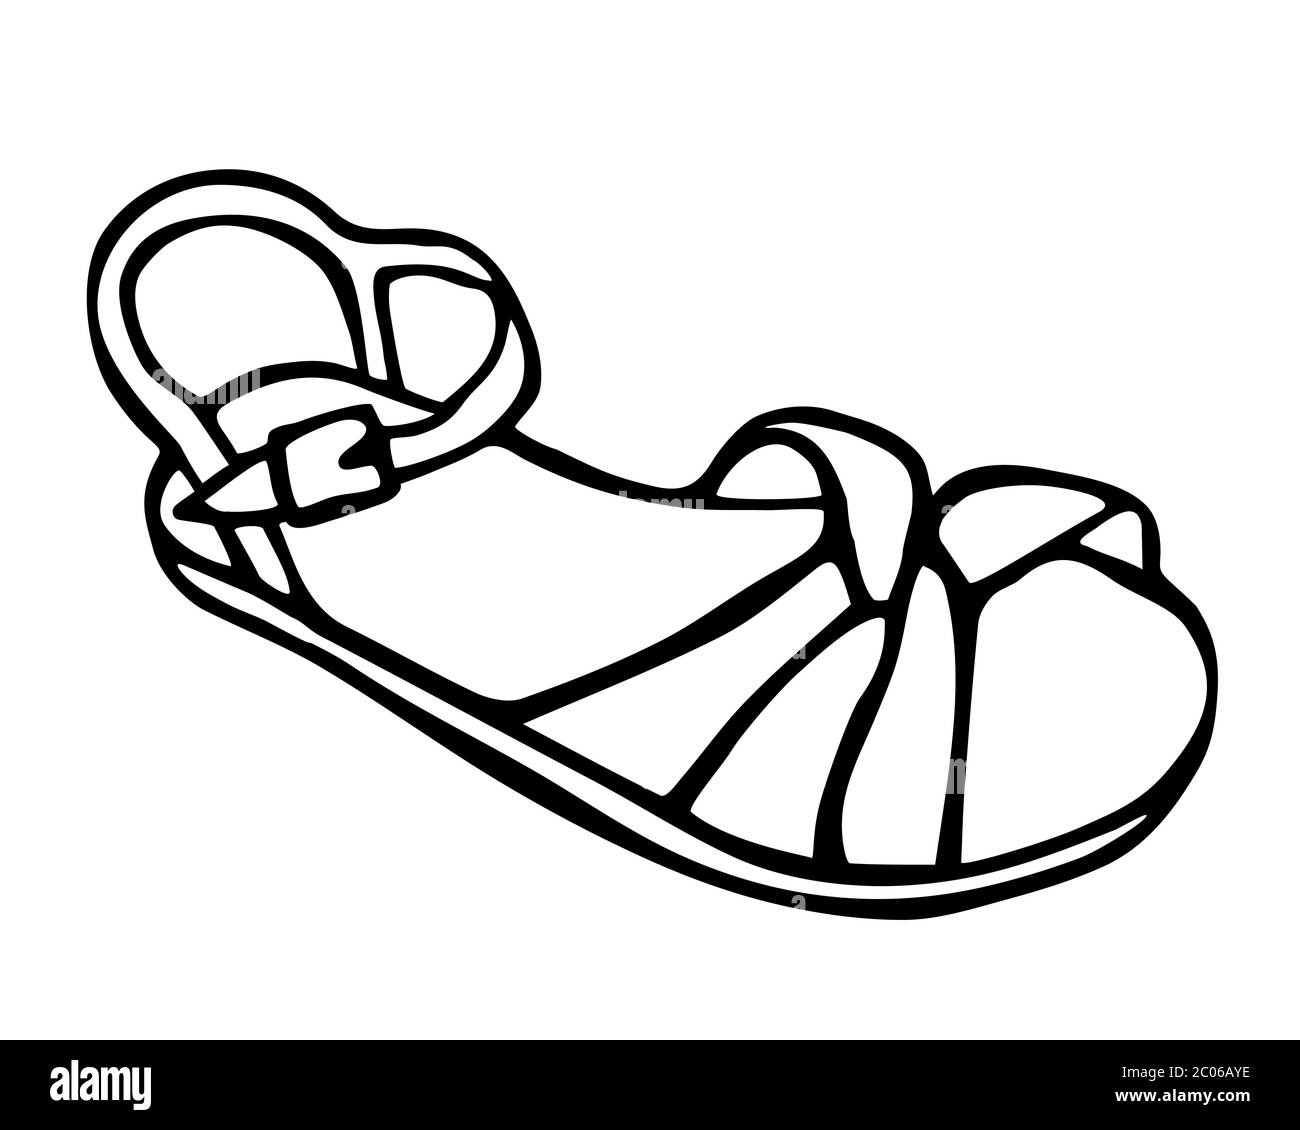 Doodle summer sandals hand drawn in line art style Stock Vector Image ...